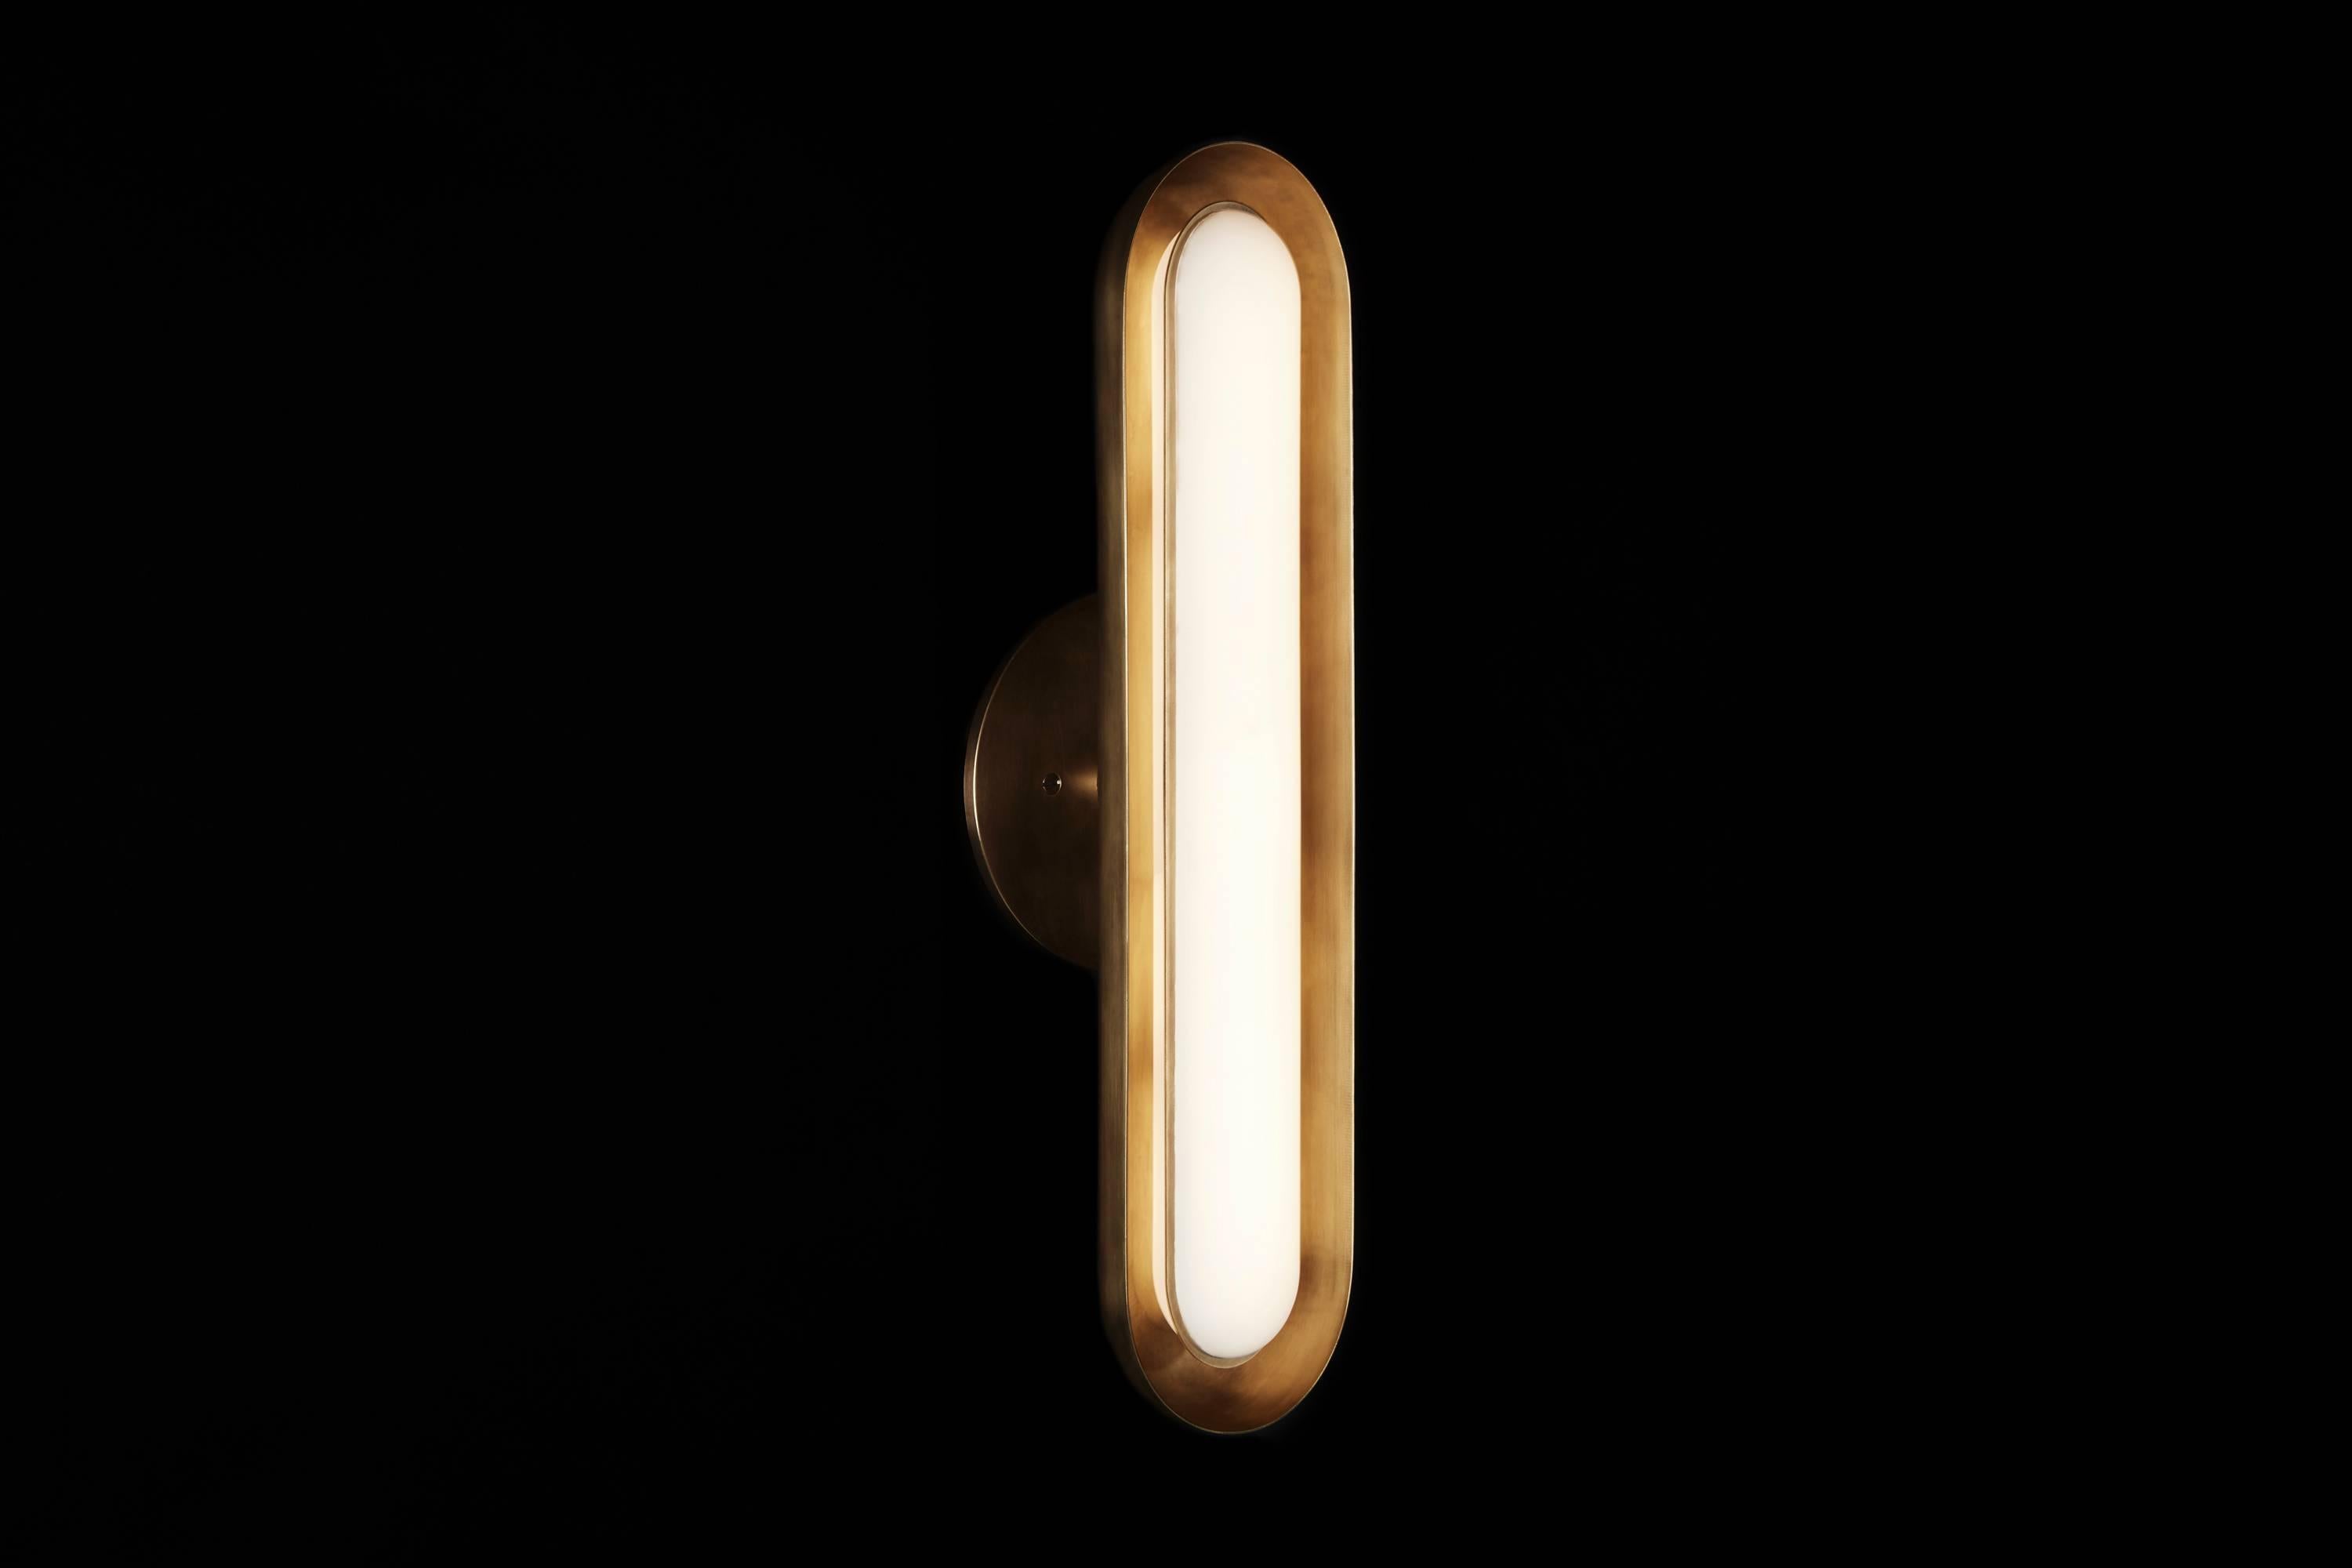 The Circuit series creates rhythm with the repetition of pure shapes. A glowing glass capsule nests in a brass shade, becoming a contained form that multiplies to construct larger fixtures.

The Circuit 1 has a specially developed, warm LED light